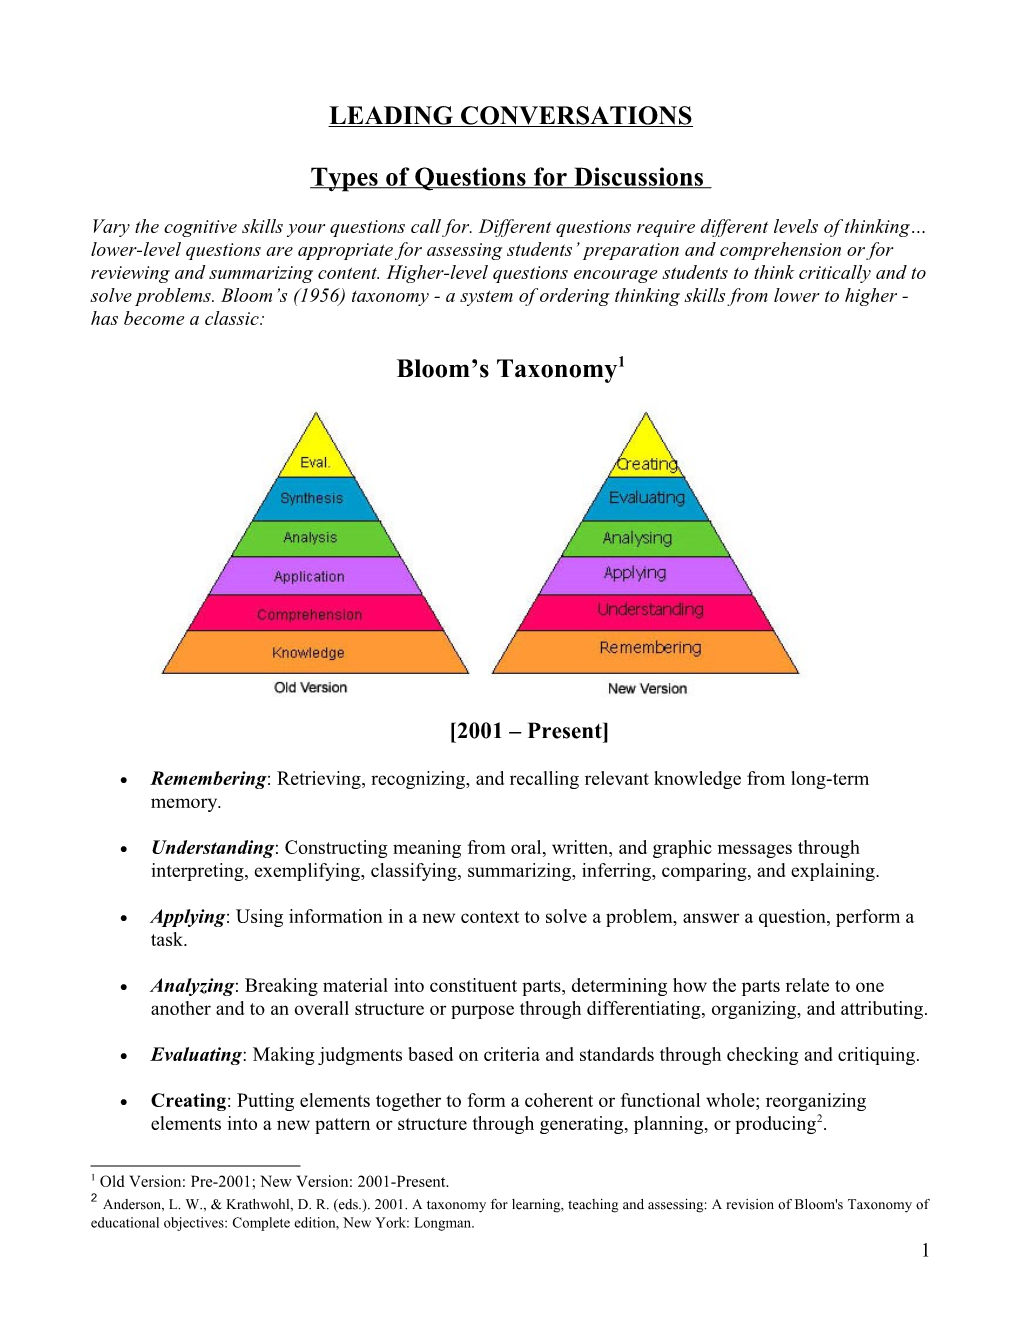 Types of Questions for Discussions & Dialogue